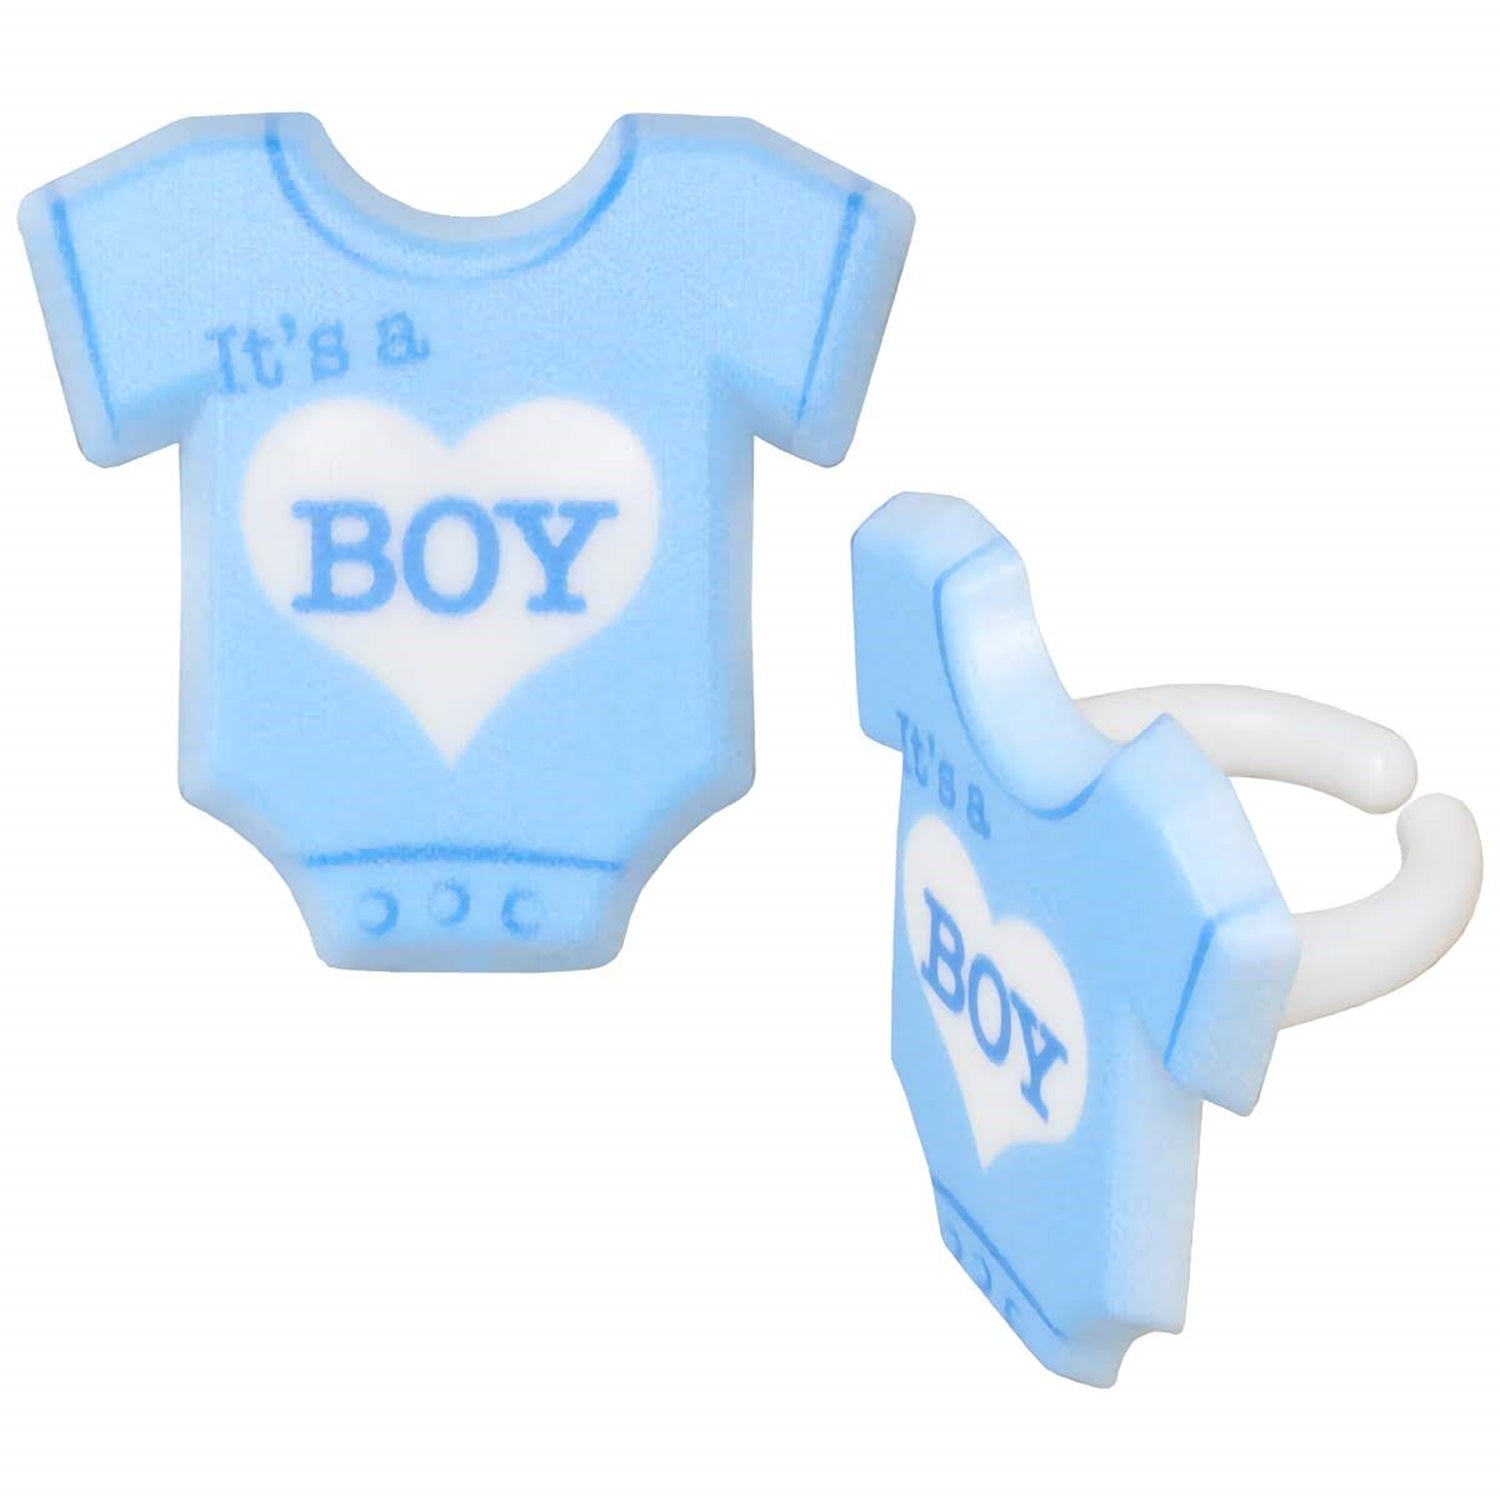 Blue 'It's a Boy' cupcake ring set of six, a charming addition to baby shower sweets and bakery decorations.